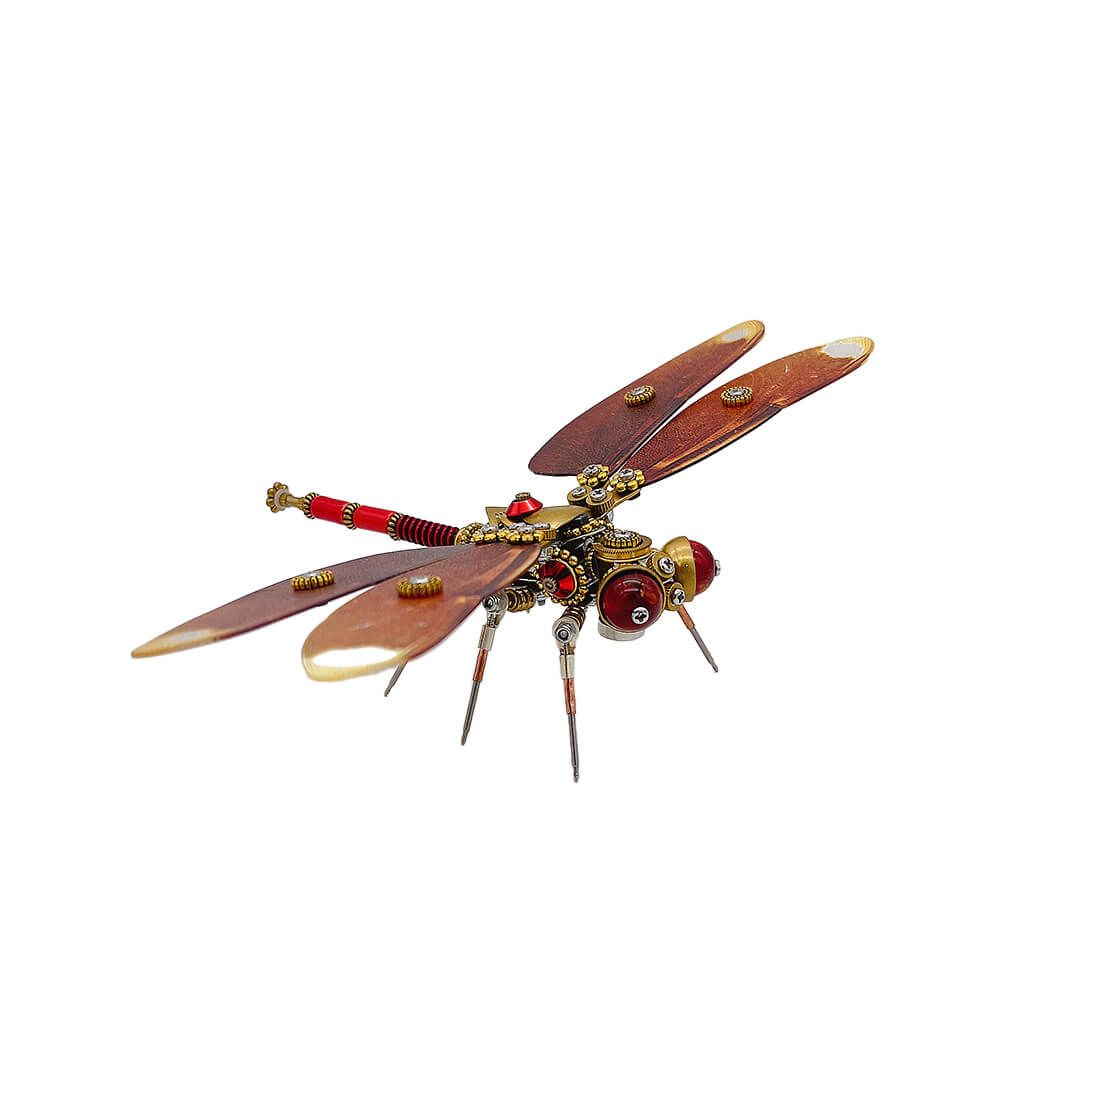 Metal Assembly Veined Dragonfly Model 3D DIY Punk Insect Assembly Model Creative Ornament (200+PCS)